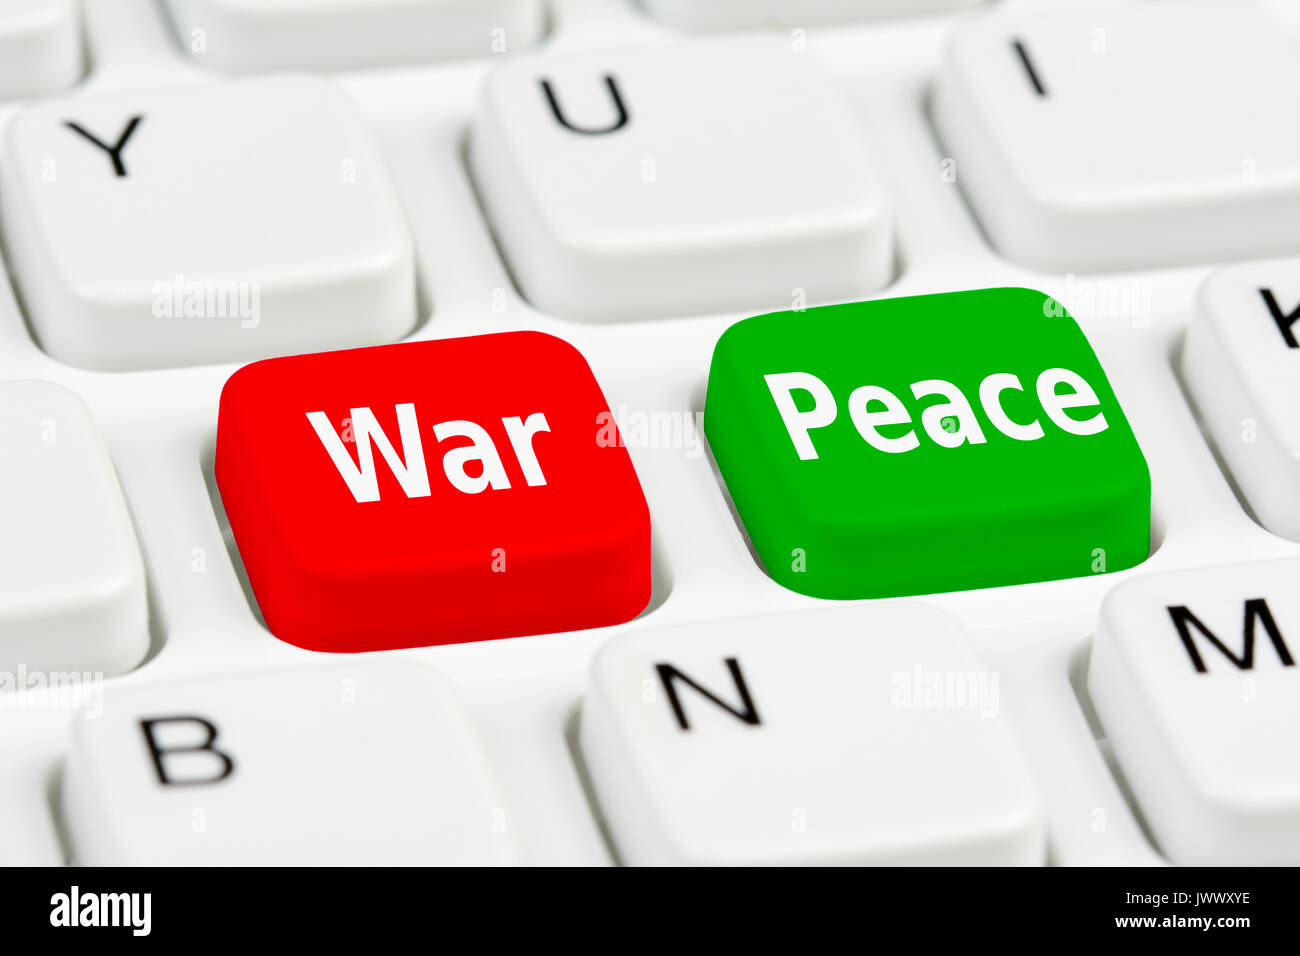 War and Peace buttons on a computer keyboard. Stock Photo